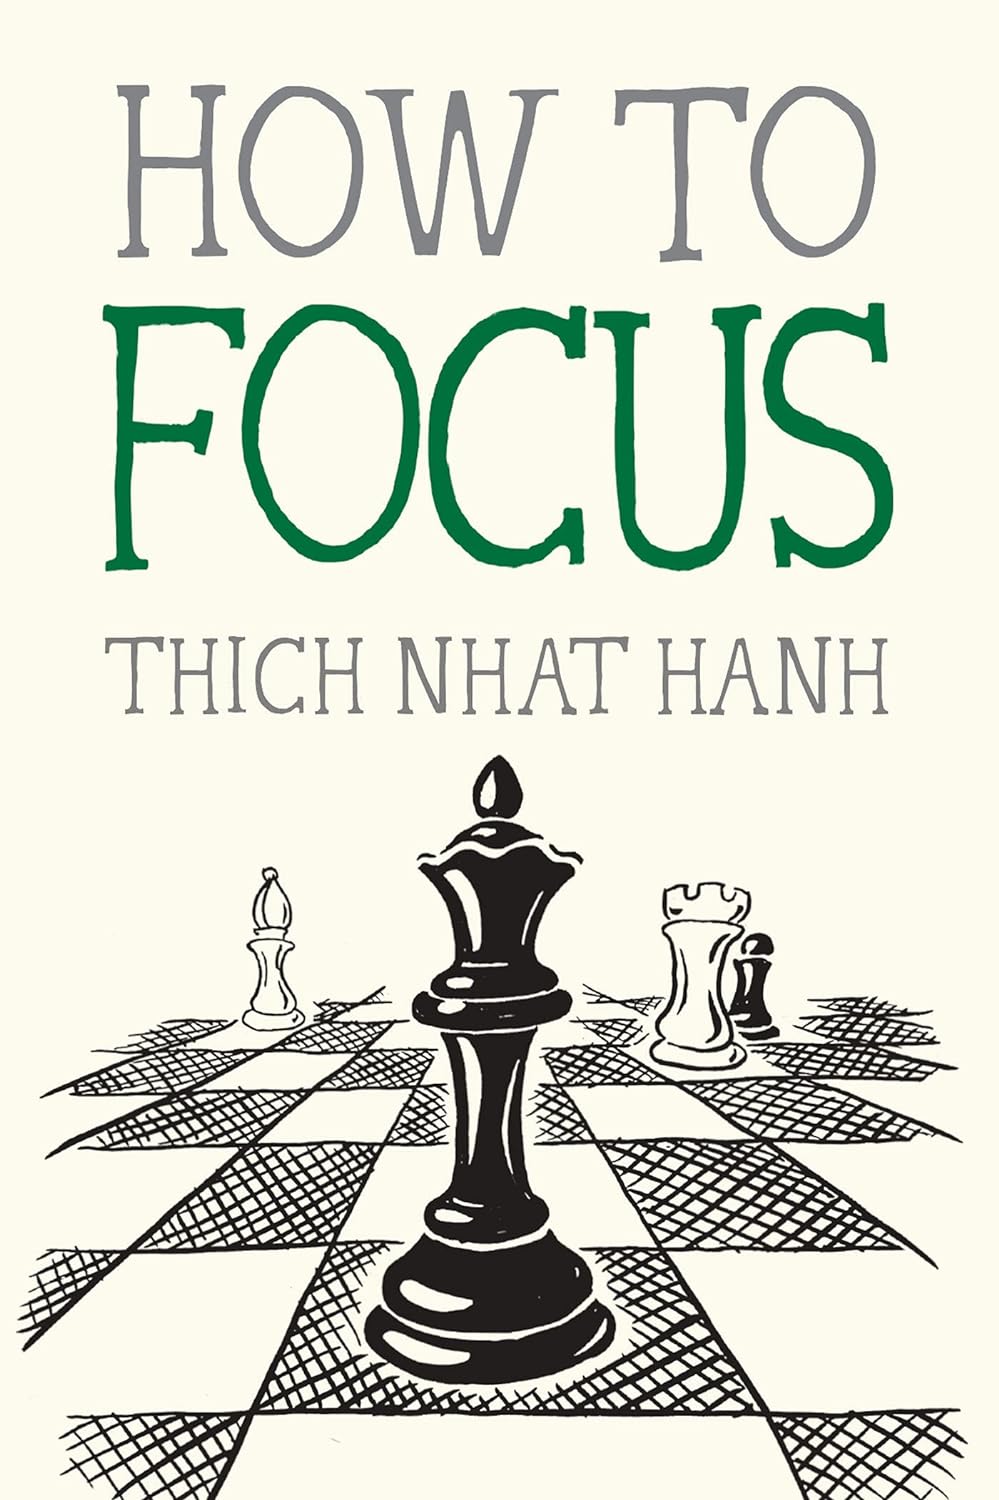 How to Focus (Mindfulness Essentials) by Thich Nhat Nanh